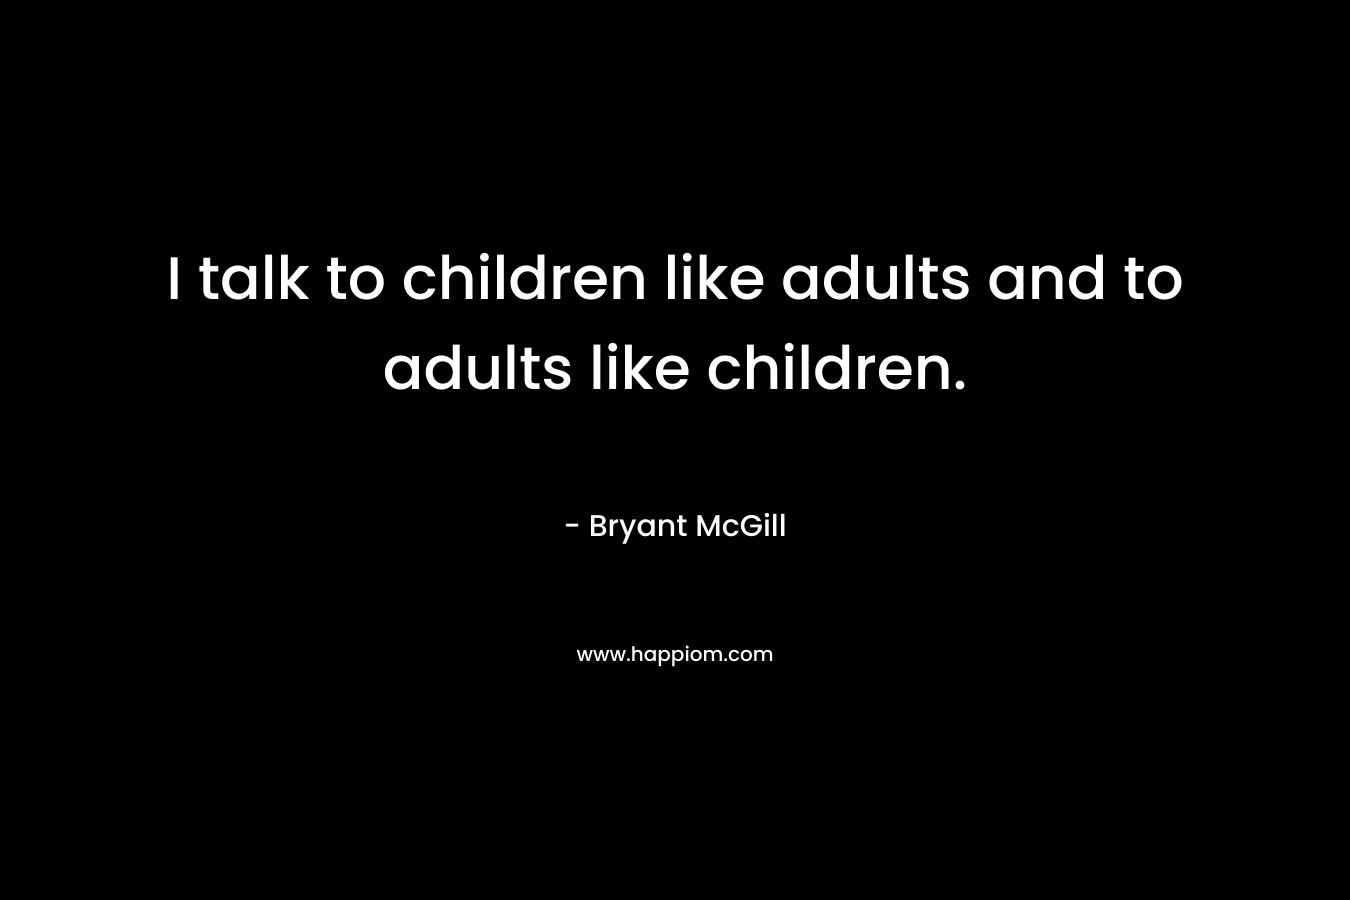 I talk to children like adults and to adults like children.